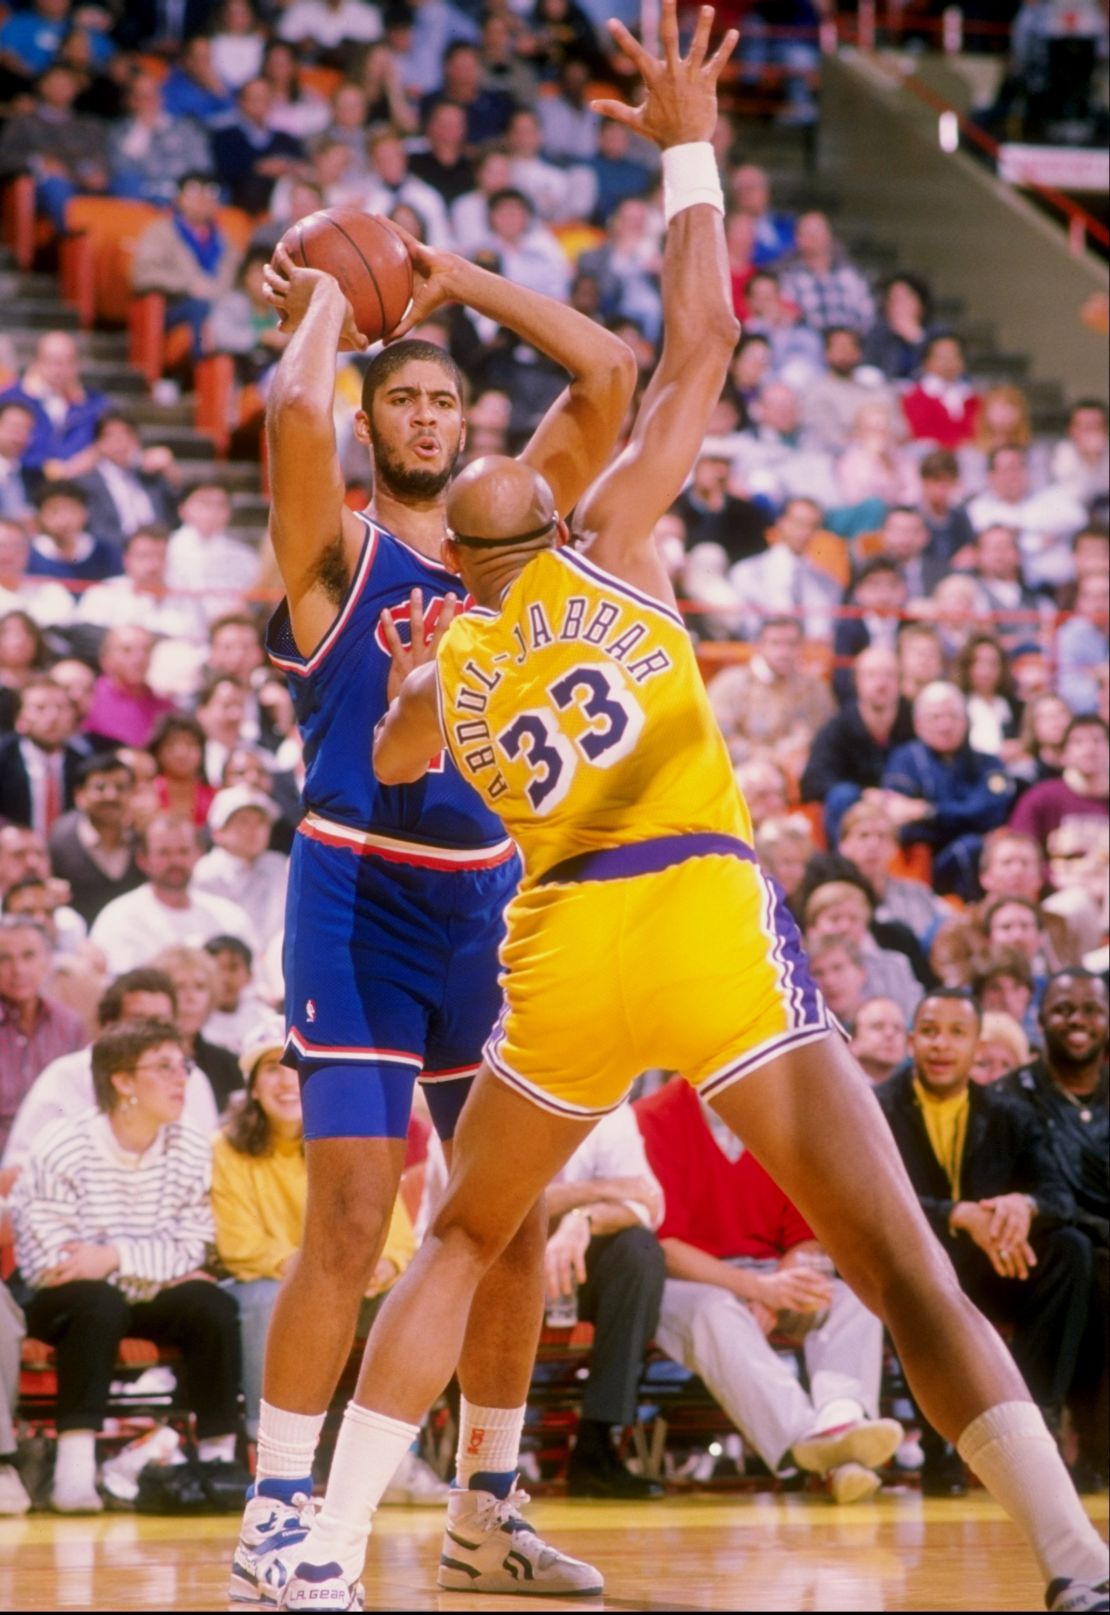 Daugherty, seen here playing against NBA great Kareem Abdul-Jabbar, used to play for the Cleveland Cavaliers in the 80s and 90s.